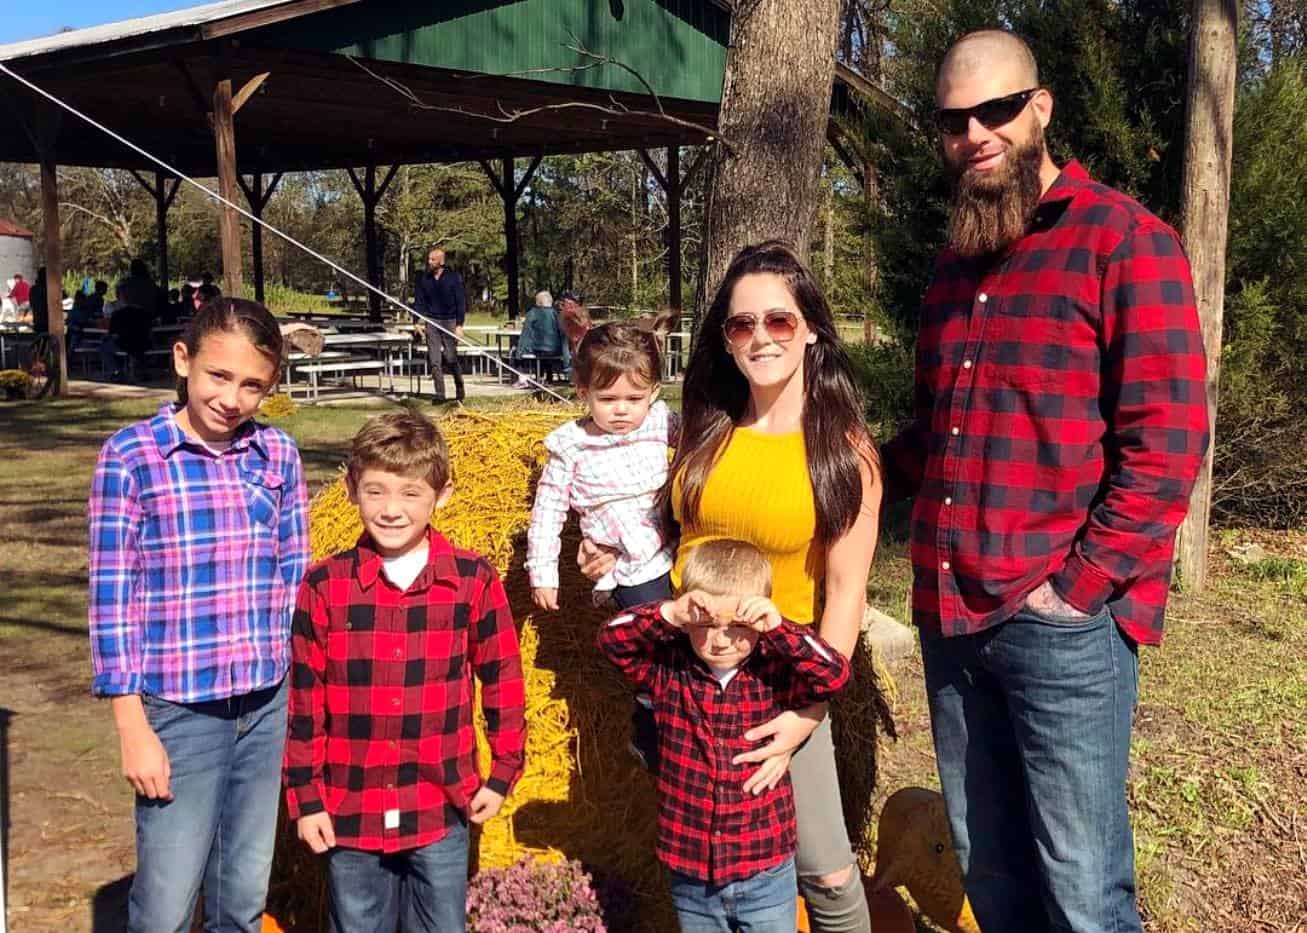 Jenelle Evans Cries in Court After Judge Rules She and David Eason Will Not Regain Custody of Kids, Teen Mom 2 Star Speaks Out After Judge Slams Her For Failing to Protect Children